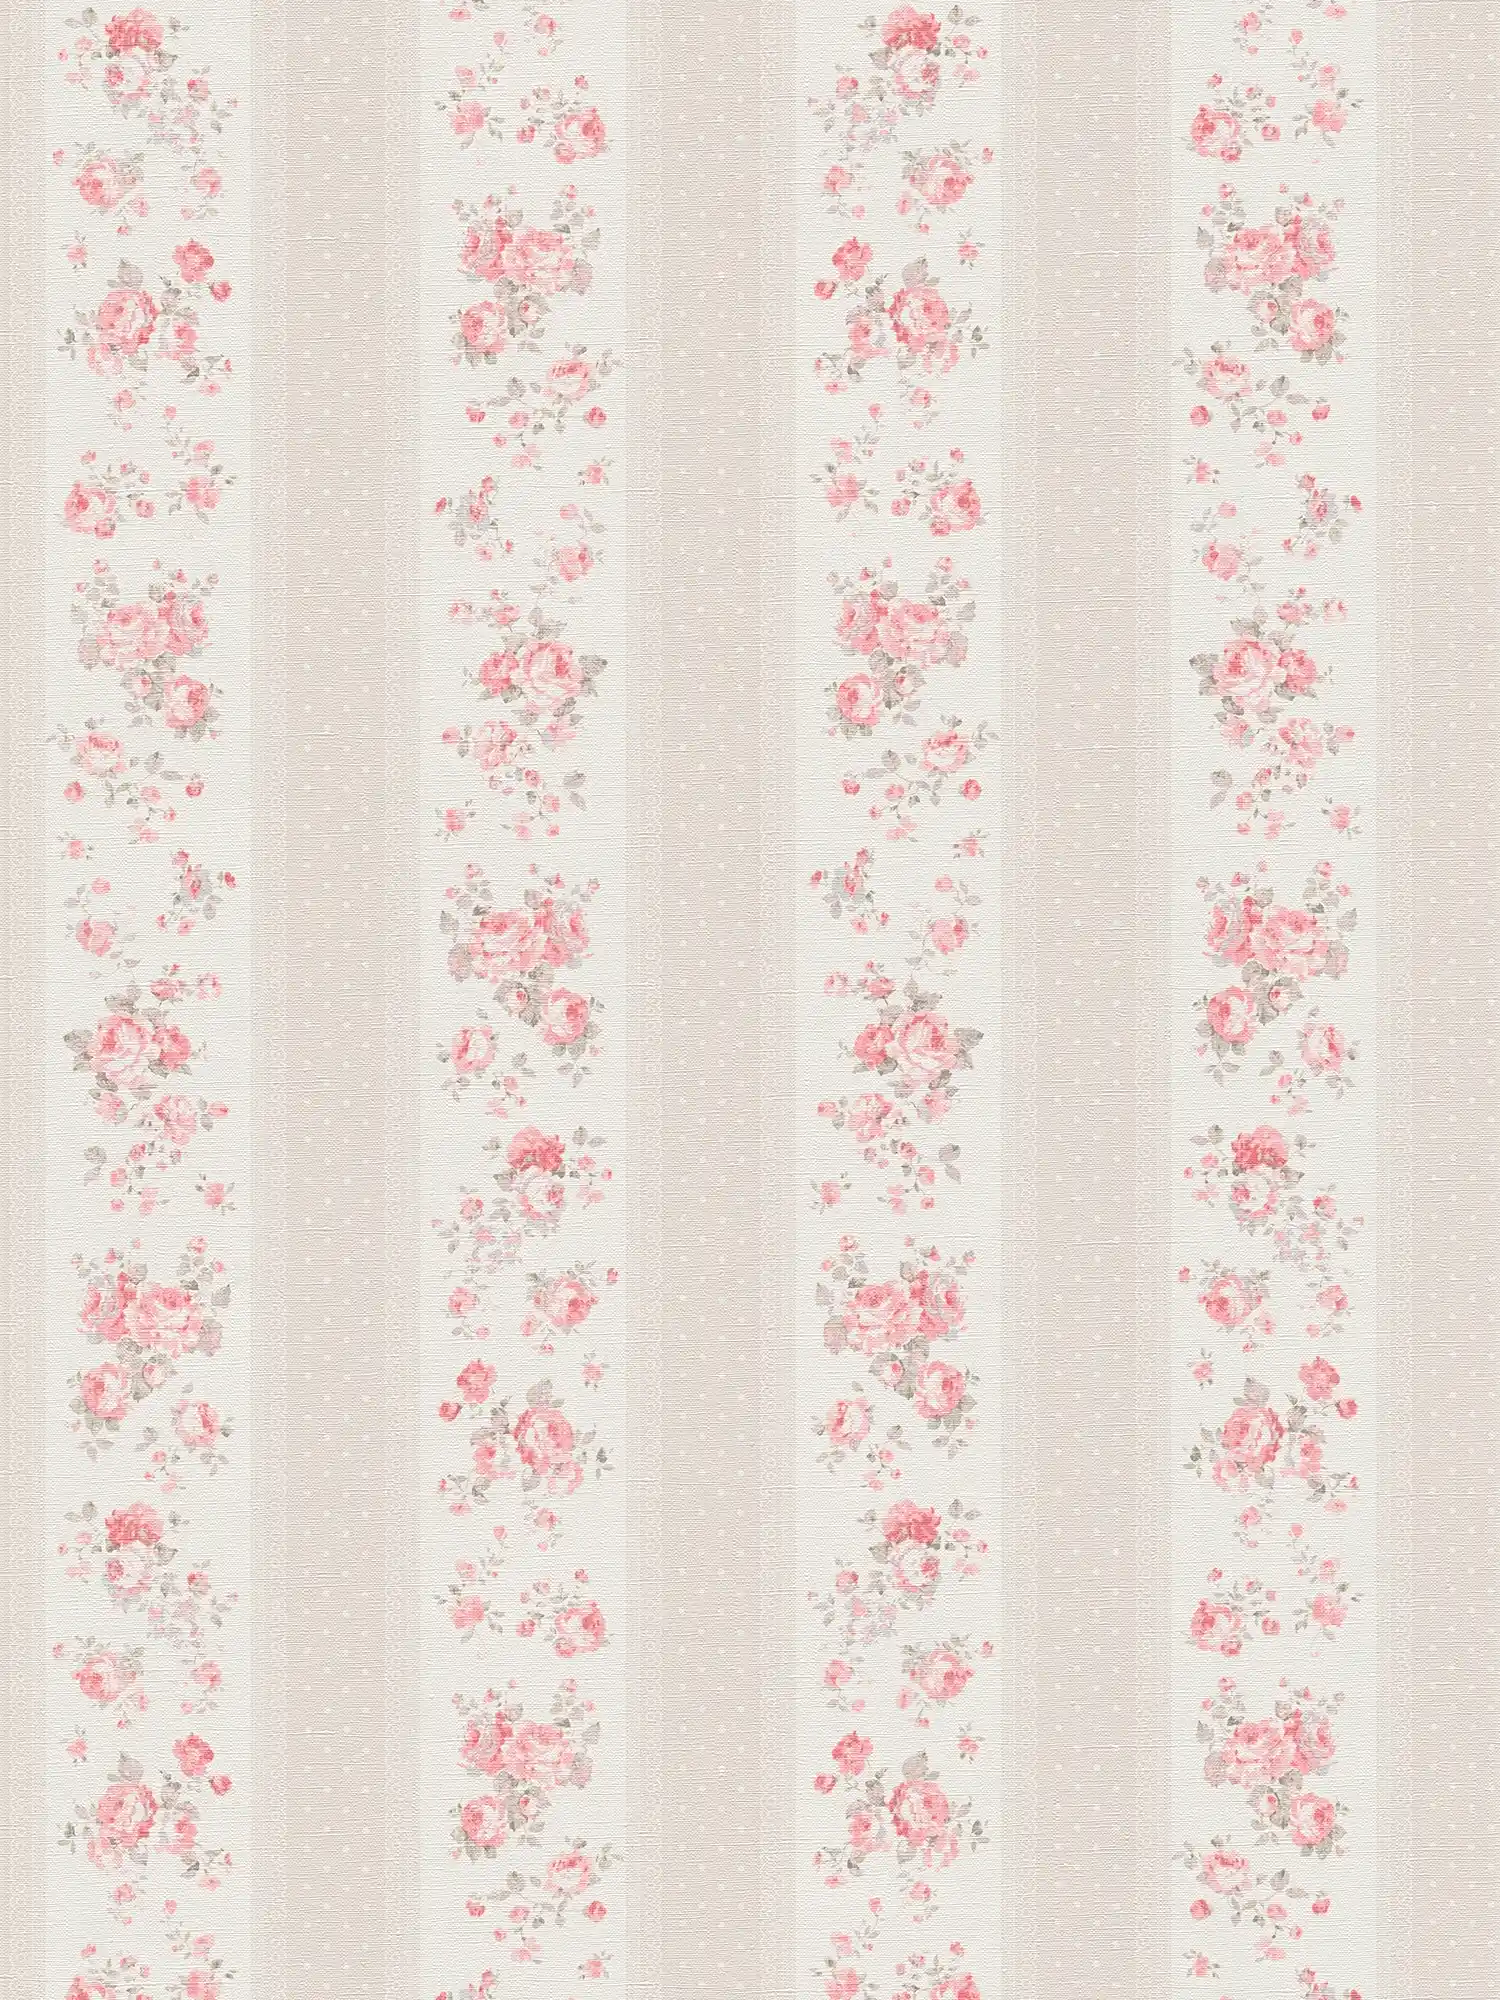 Shabby Chic style wallpaper with floral and dotted stripes - greige, white, red
